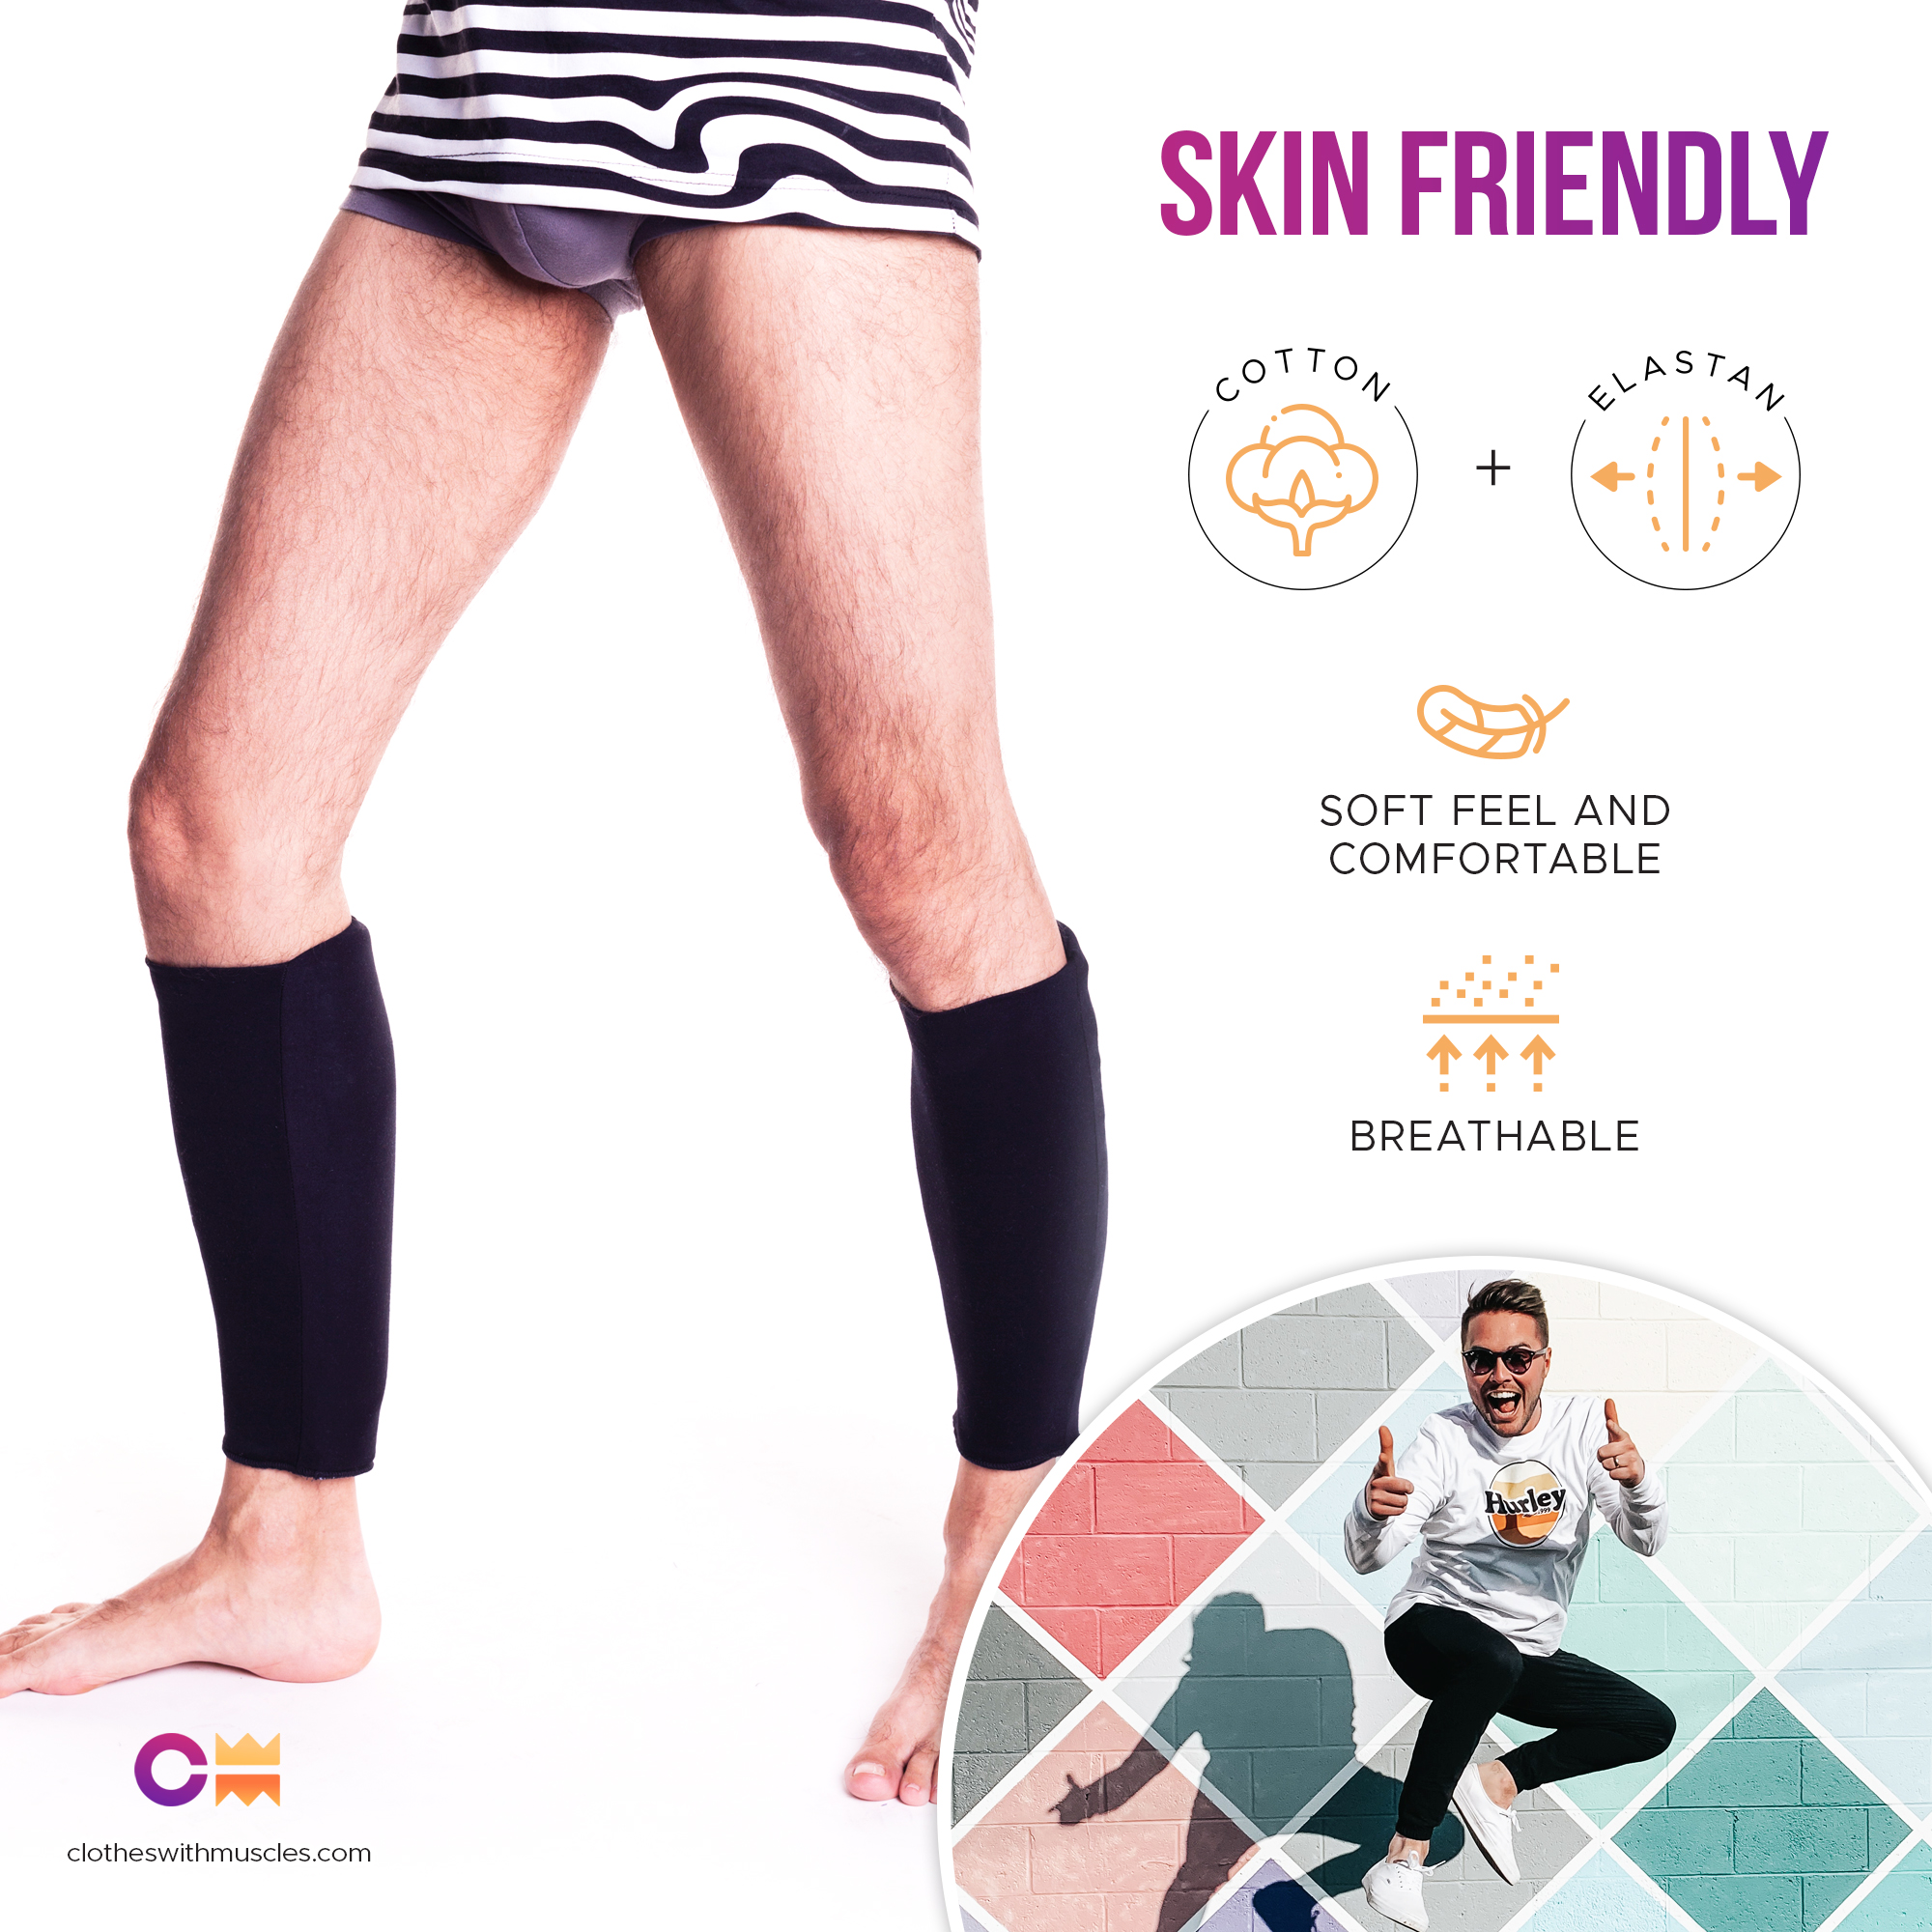 Padded Calves for Men - The #1 manufacturer of Padded Clothes with Muscles  ♛ Get the WOW Effect!